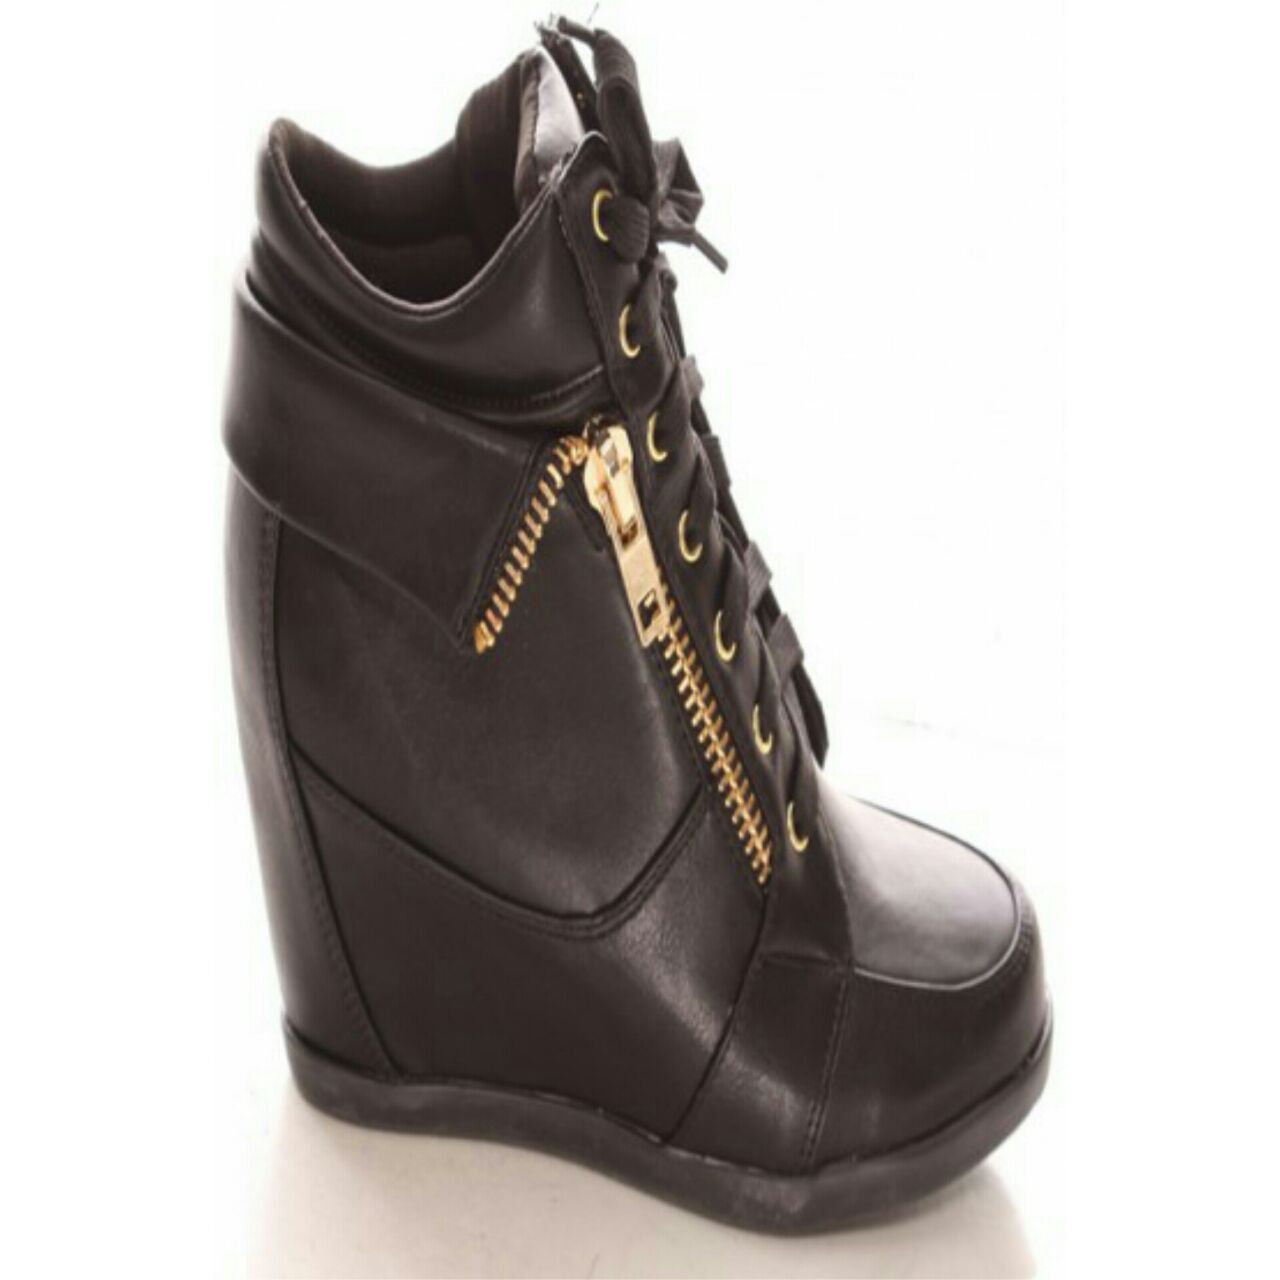 Sneaker Wedges For Sale - Fashion - Nigeria